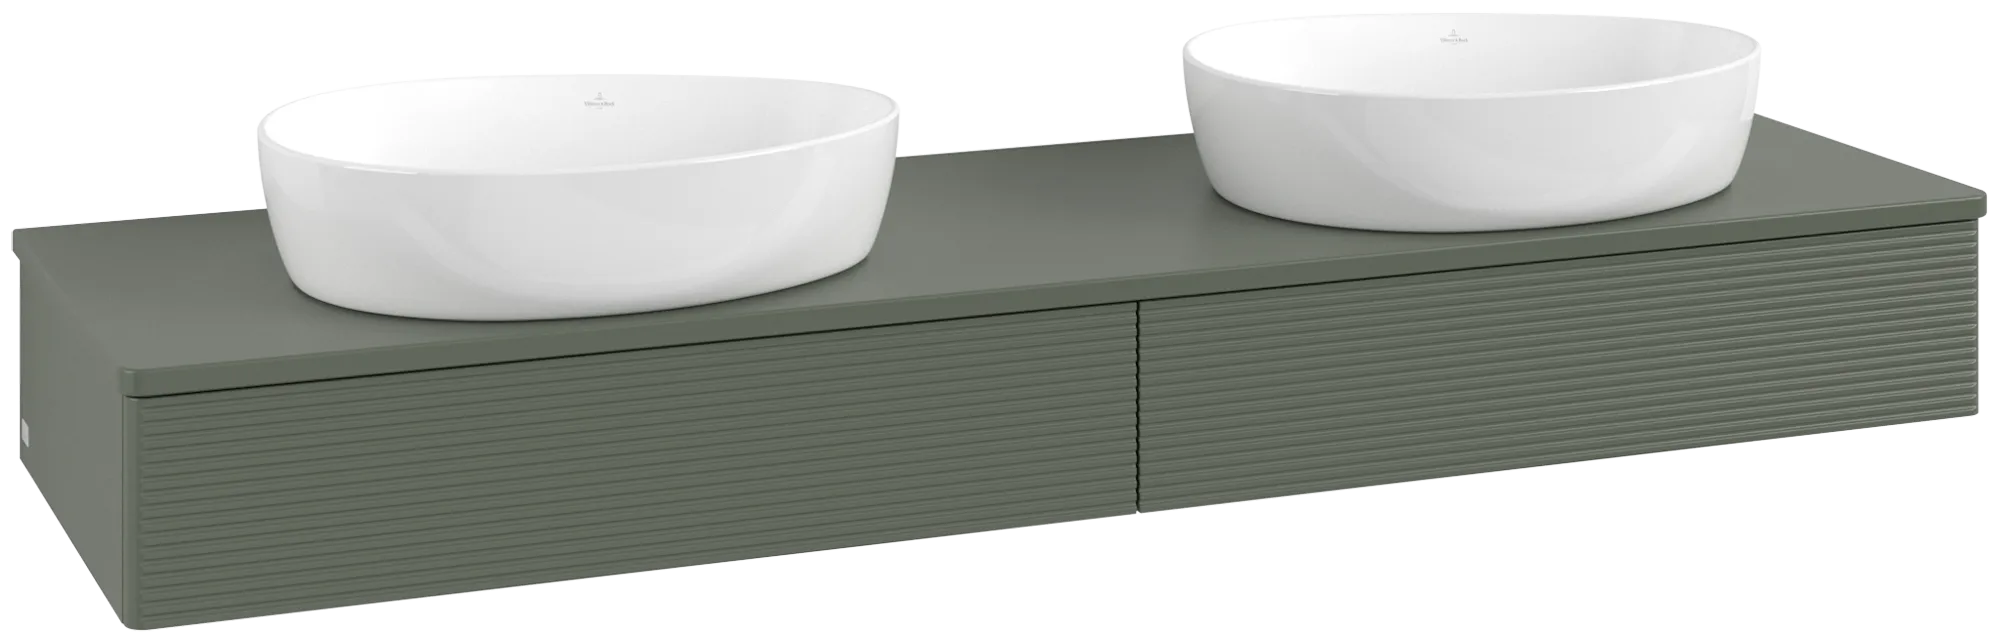 VILLEROY BOCH Antao Vanity unit, 2 pull-out compartments, 1600 x 190 x 500 mm, Front with grain texture, Leaf Green Matt Lacquer / Leaf Green Matt Lacquer #K17110HL resmi